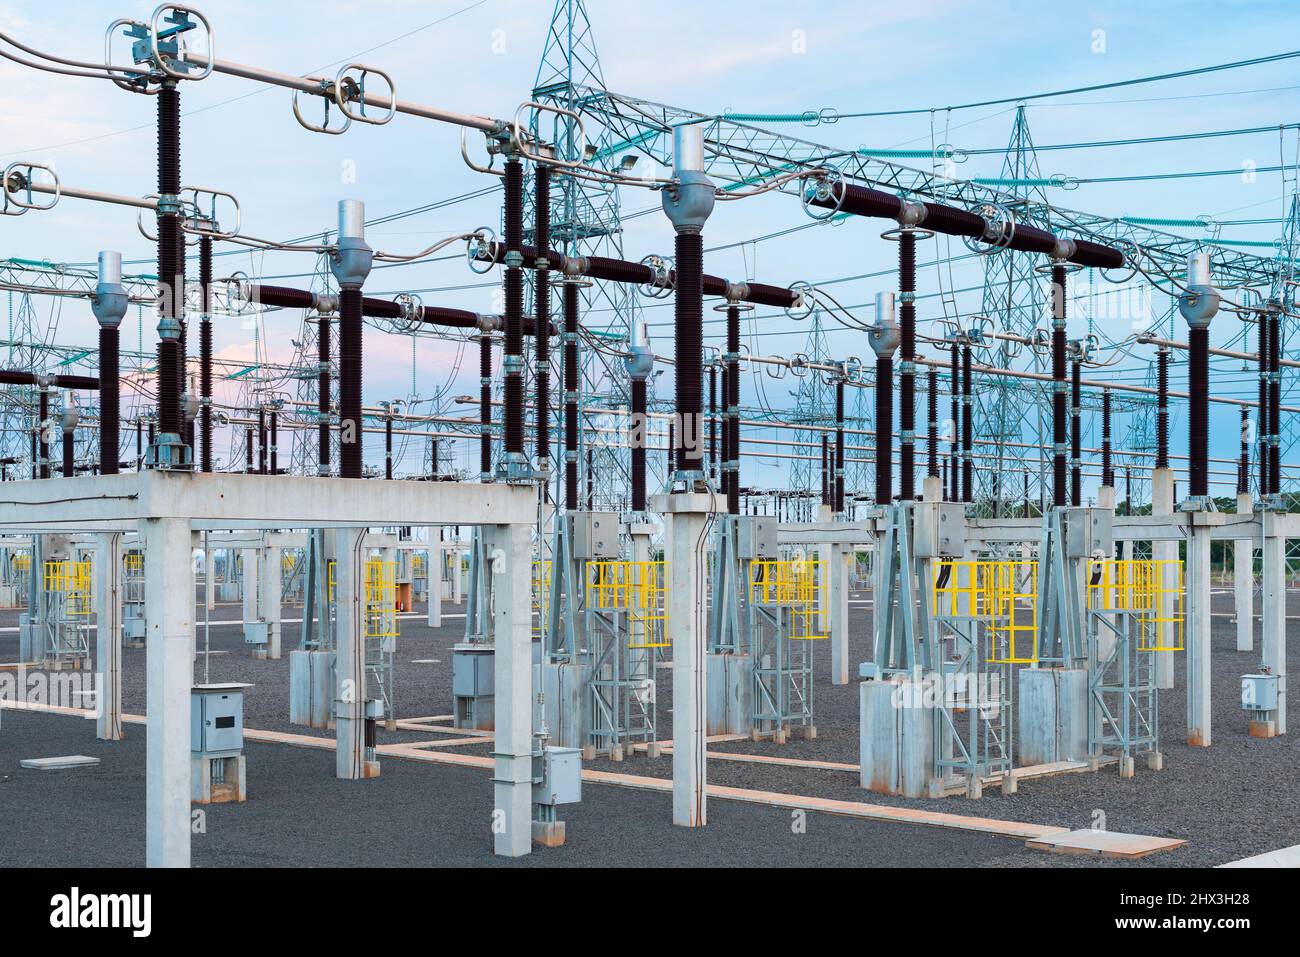 Electric substation in Paraguay at dusk Stock Photo